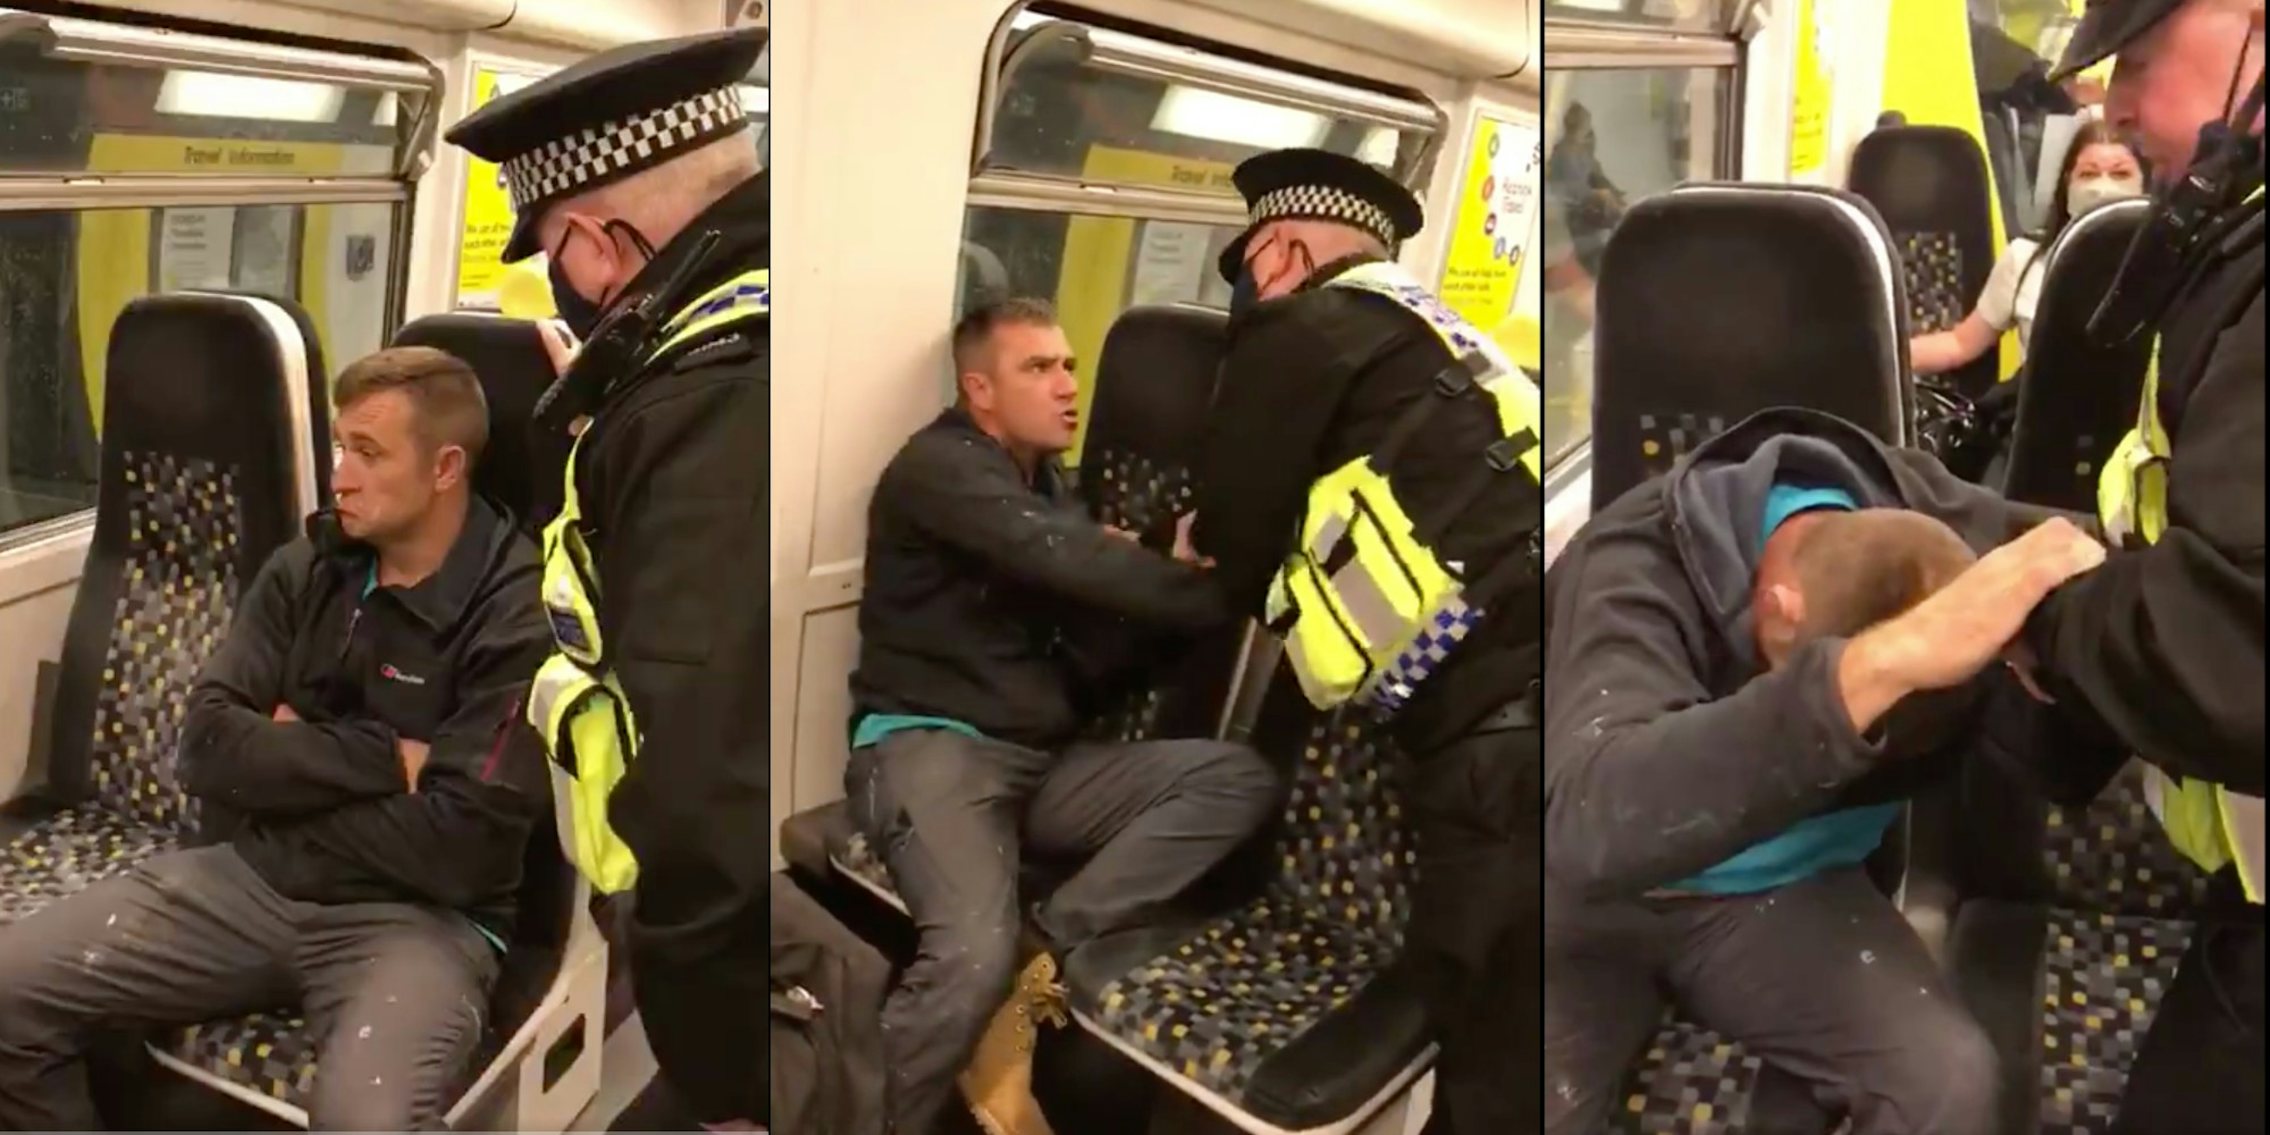 Maskless man fights with a train officer and refuses to wear a mask